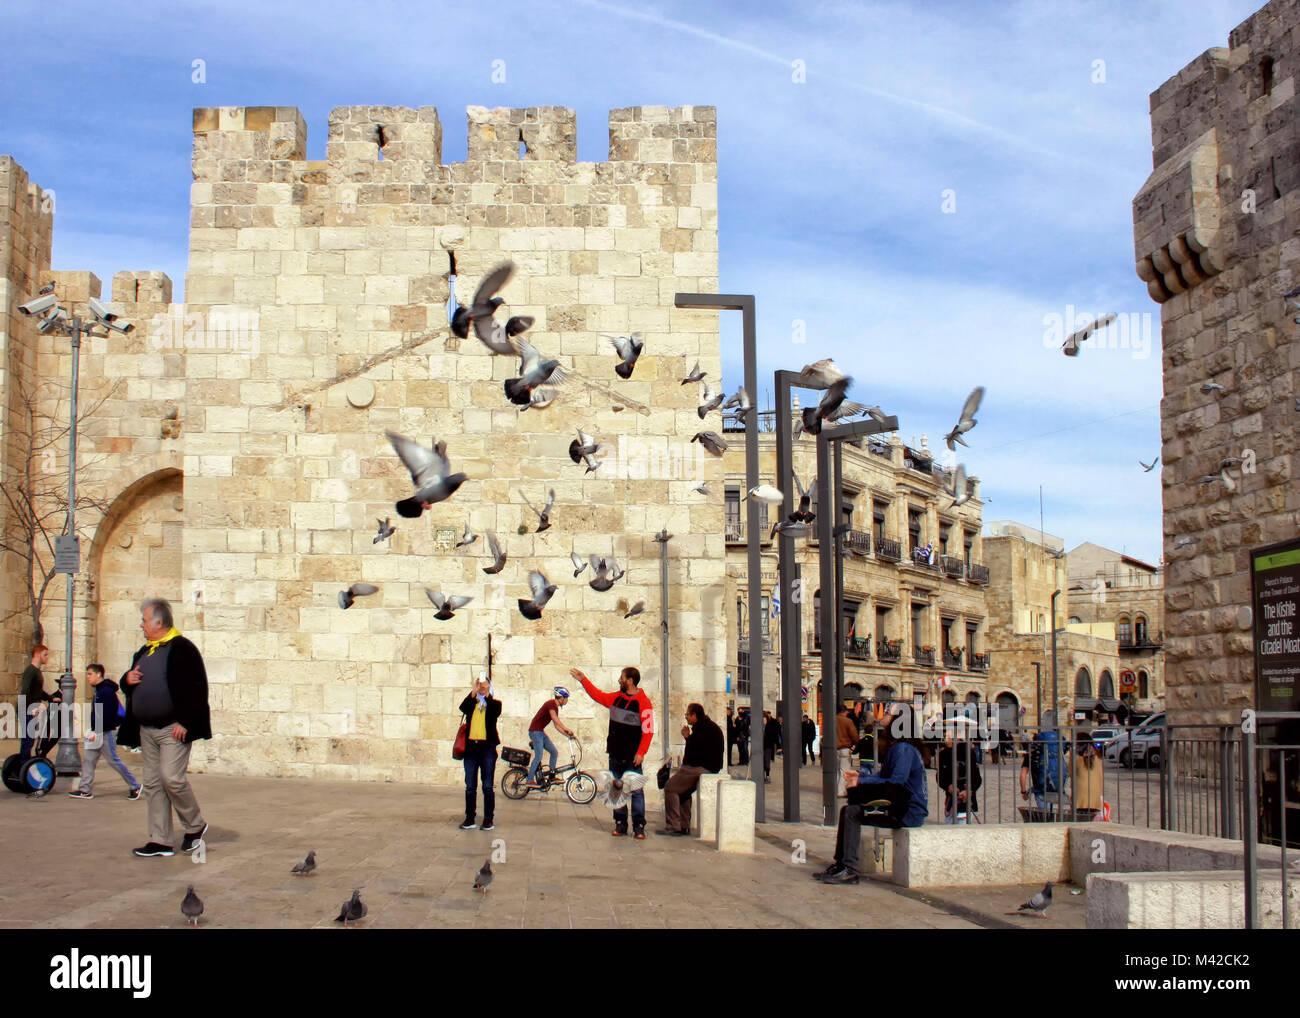 Pigeons scatter into the air at the plaza outside Jaffa Gate in Jerusalem's Old City. Stock Photo